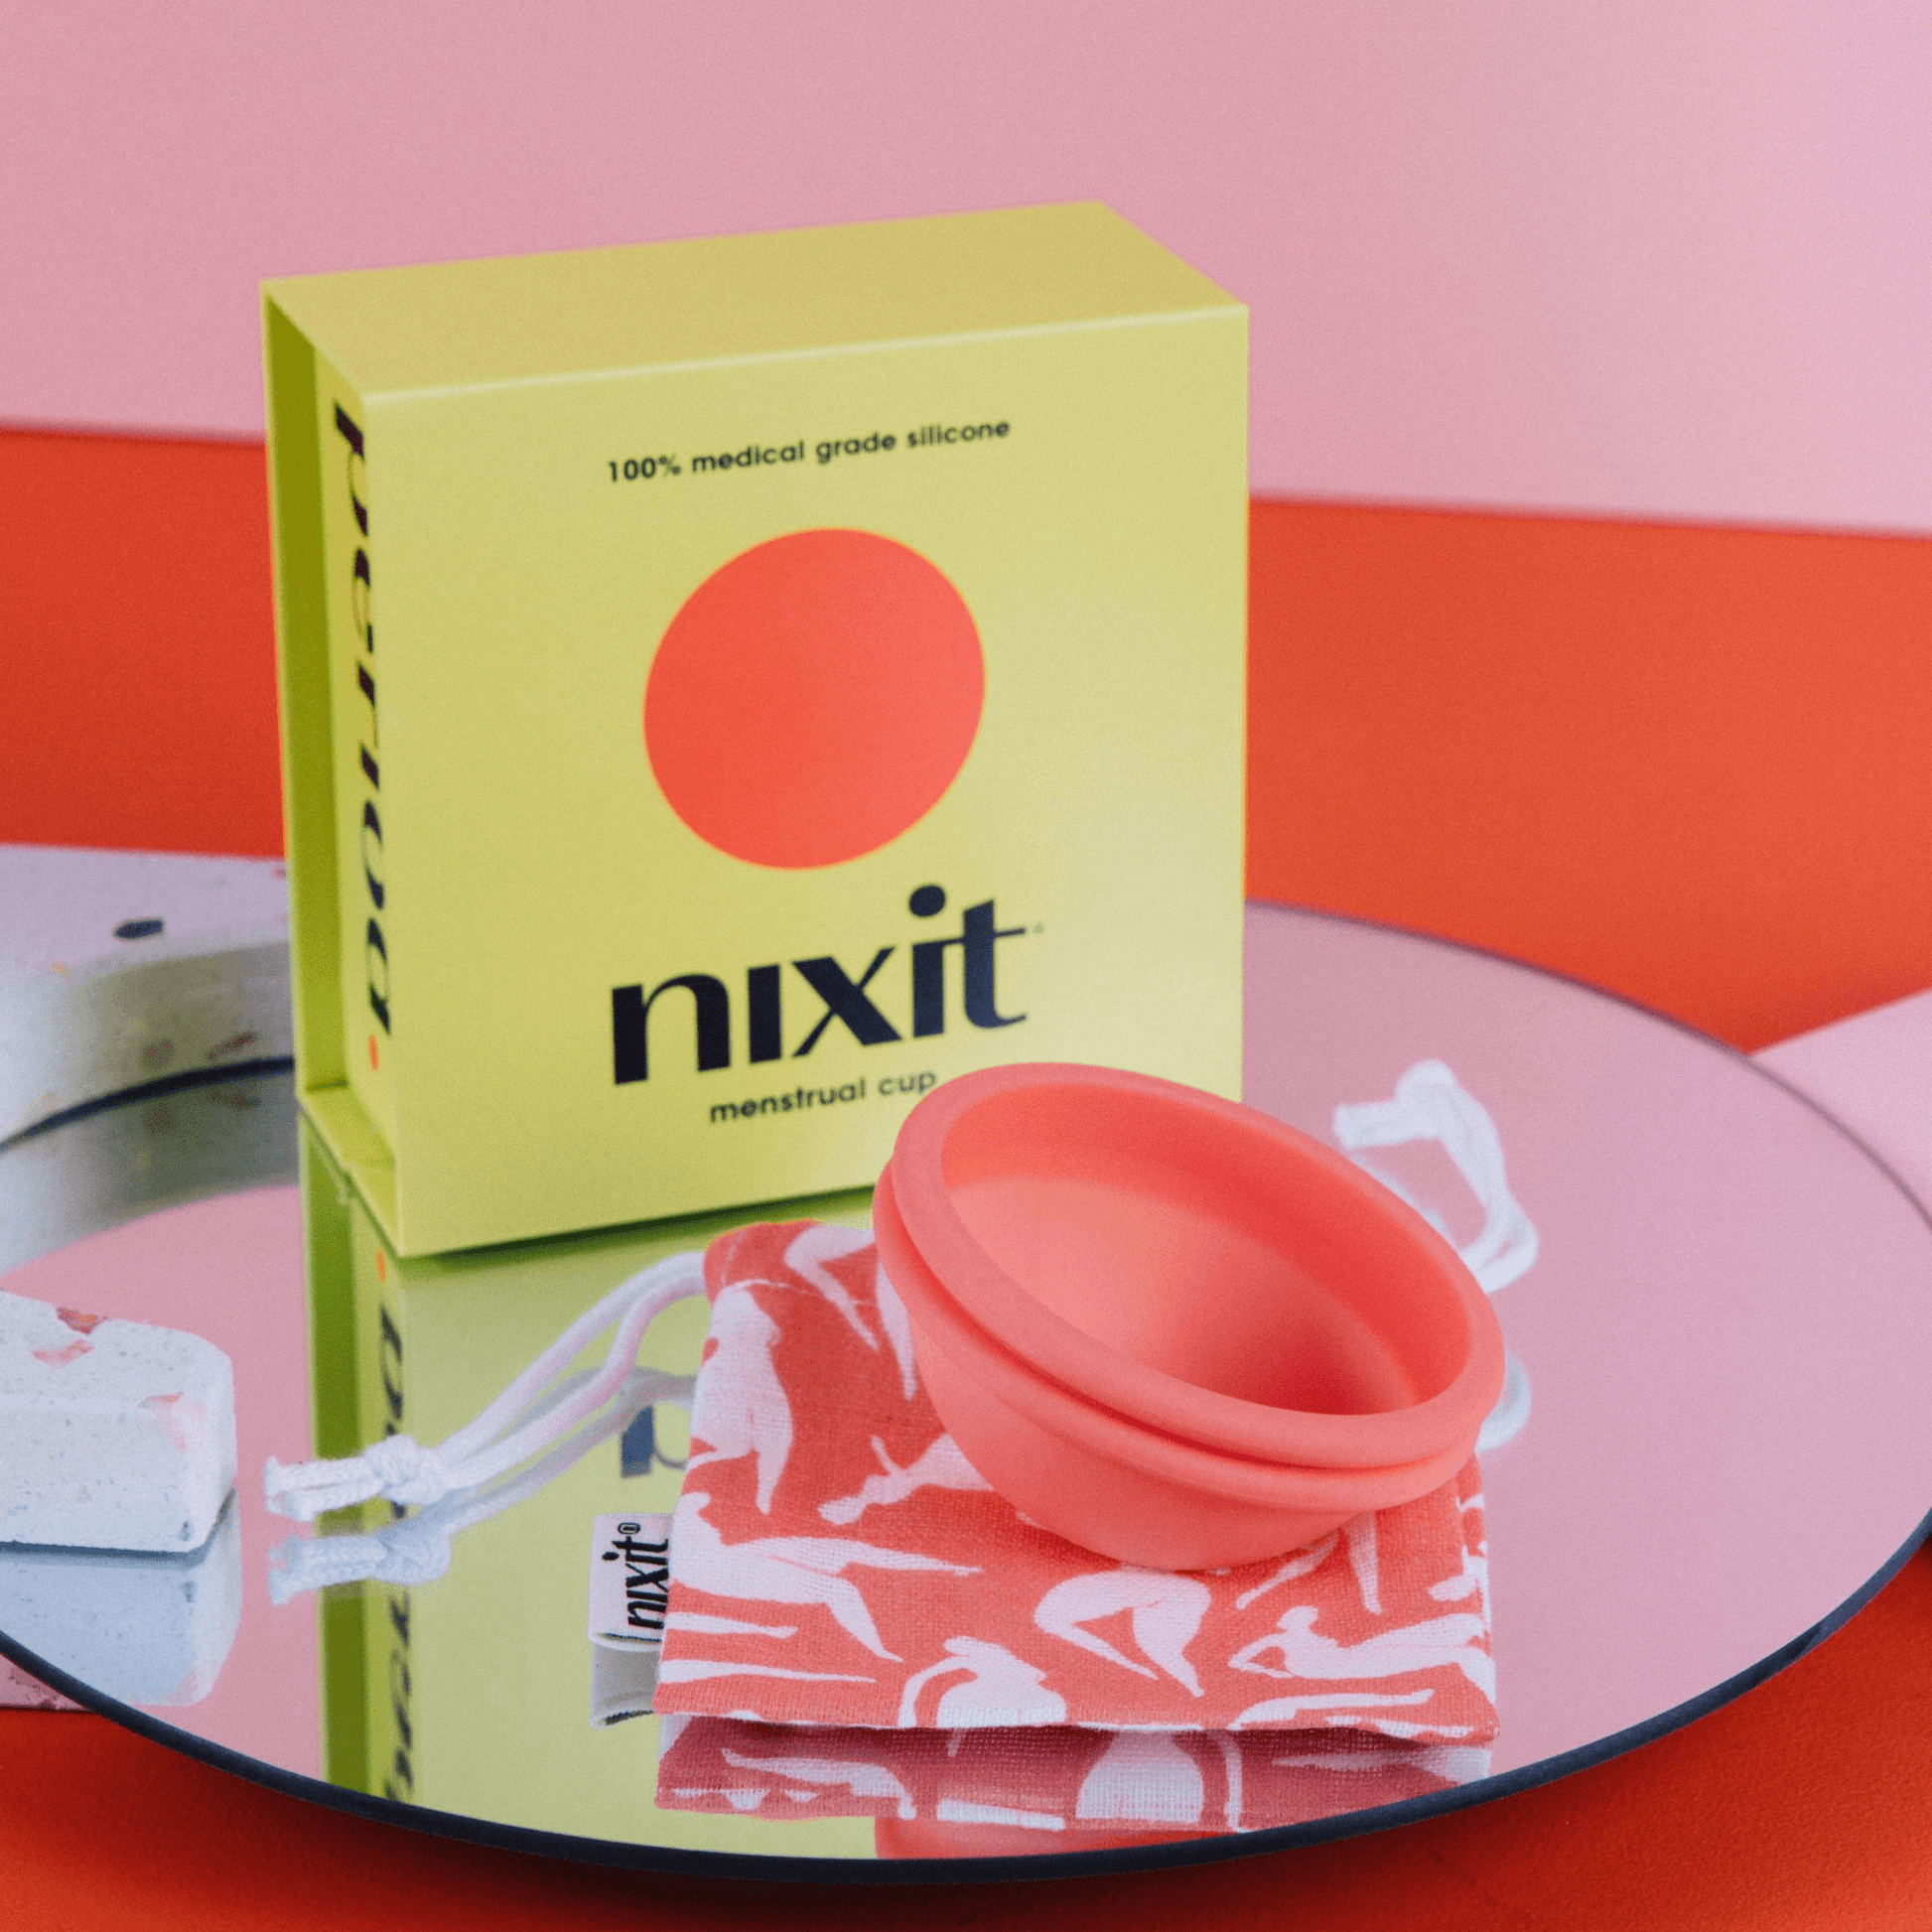 nixit menstrual cup on Instagram: Shoutout to anyone that's been using  their nixit for 5 years strong! 🌟💪 You've likely saved around $700 if you  were a pad or tampon user prior